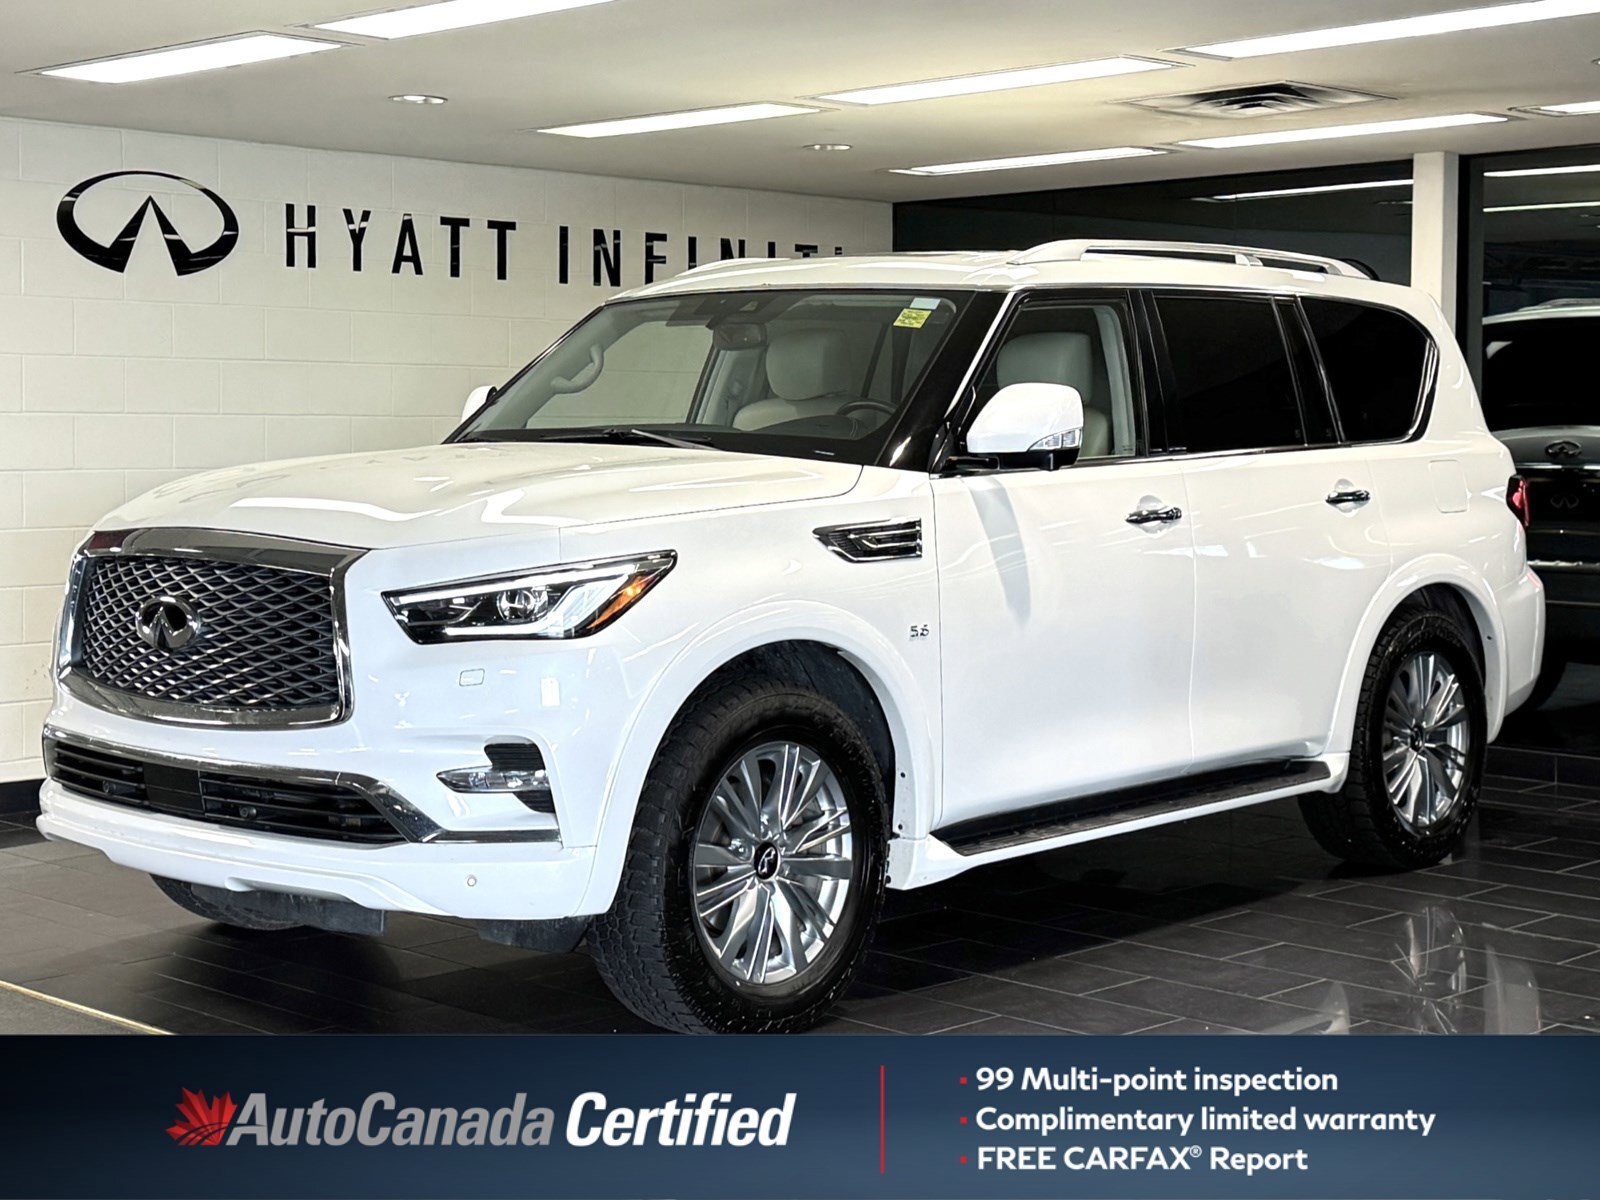 2019 Infiniti QX80 LUXE - No Accidents | One Owner | Air Suspension  